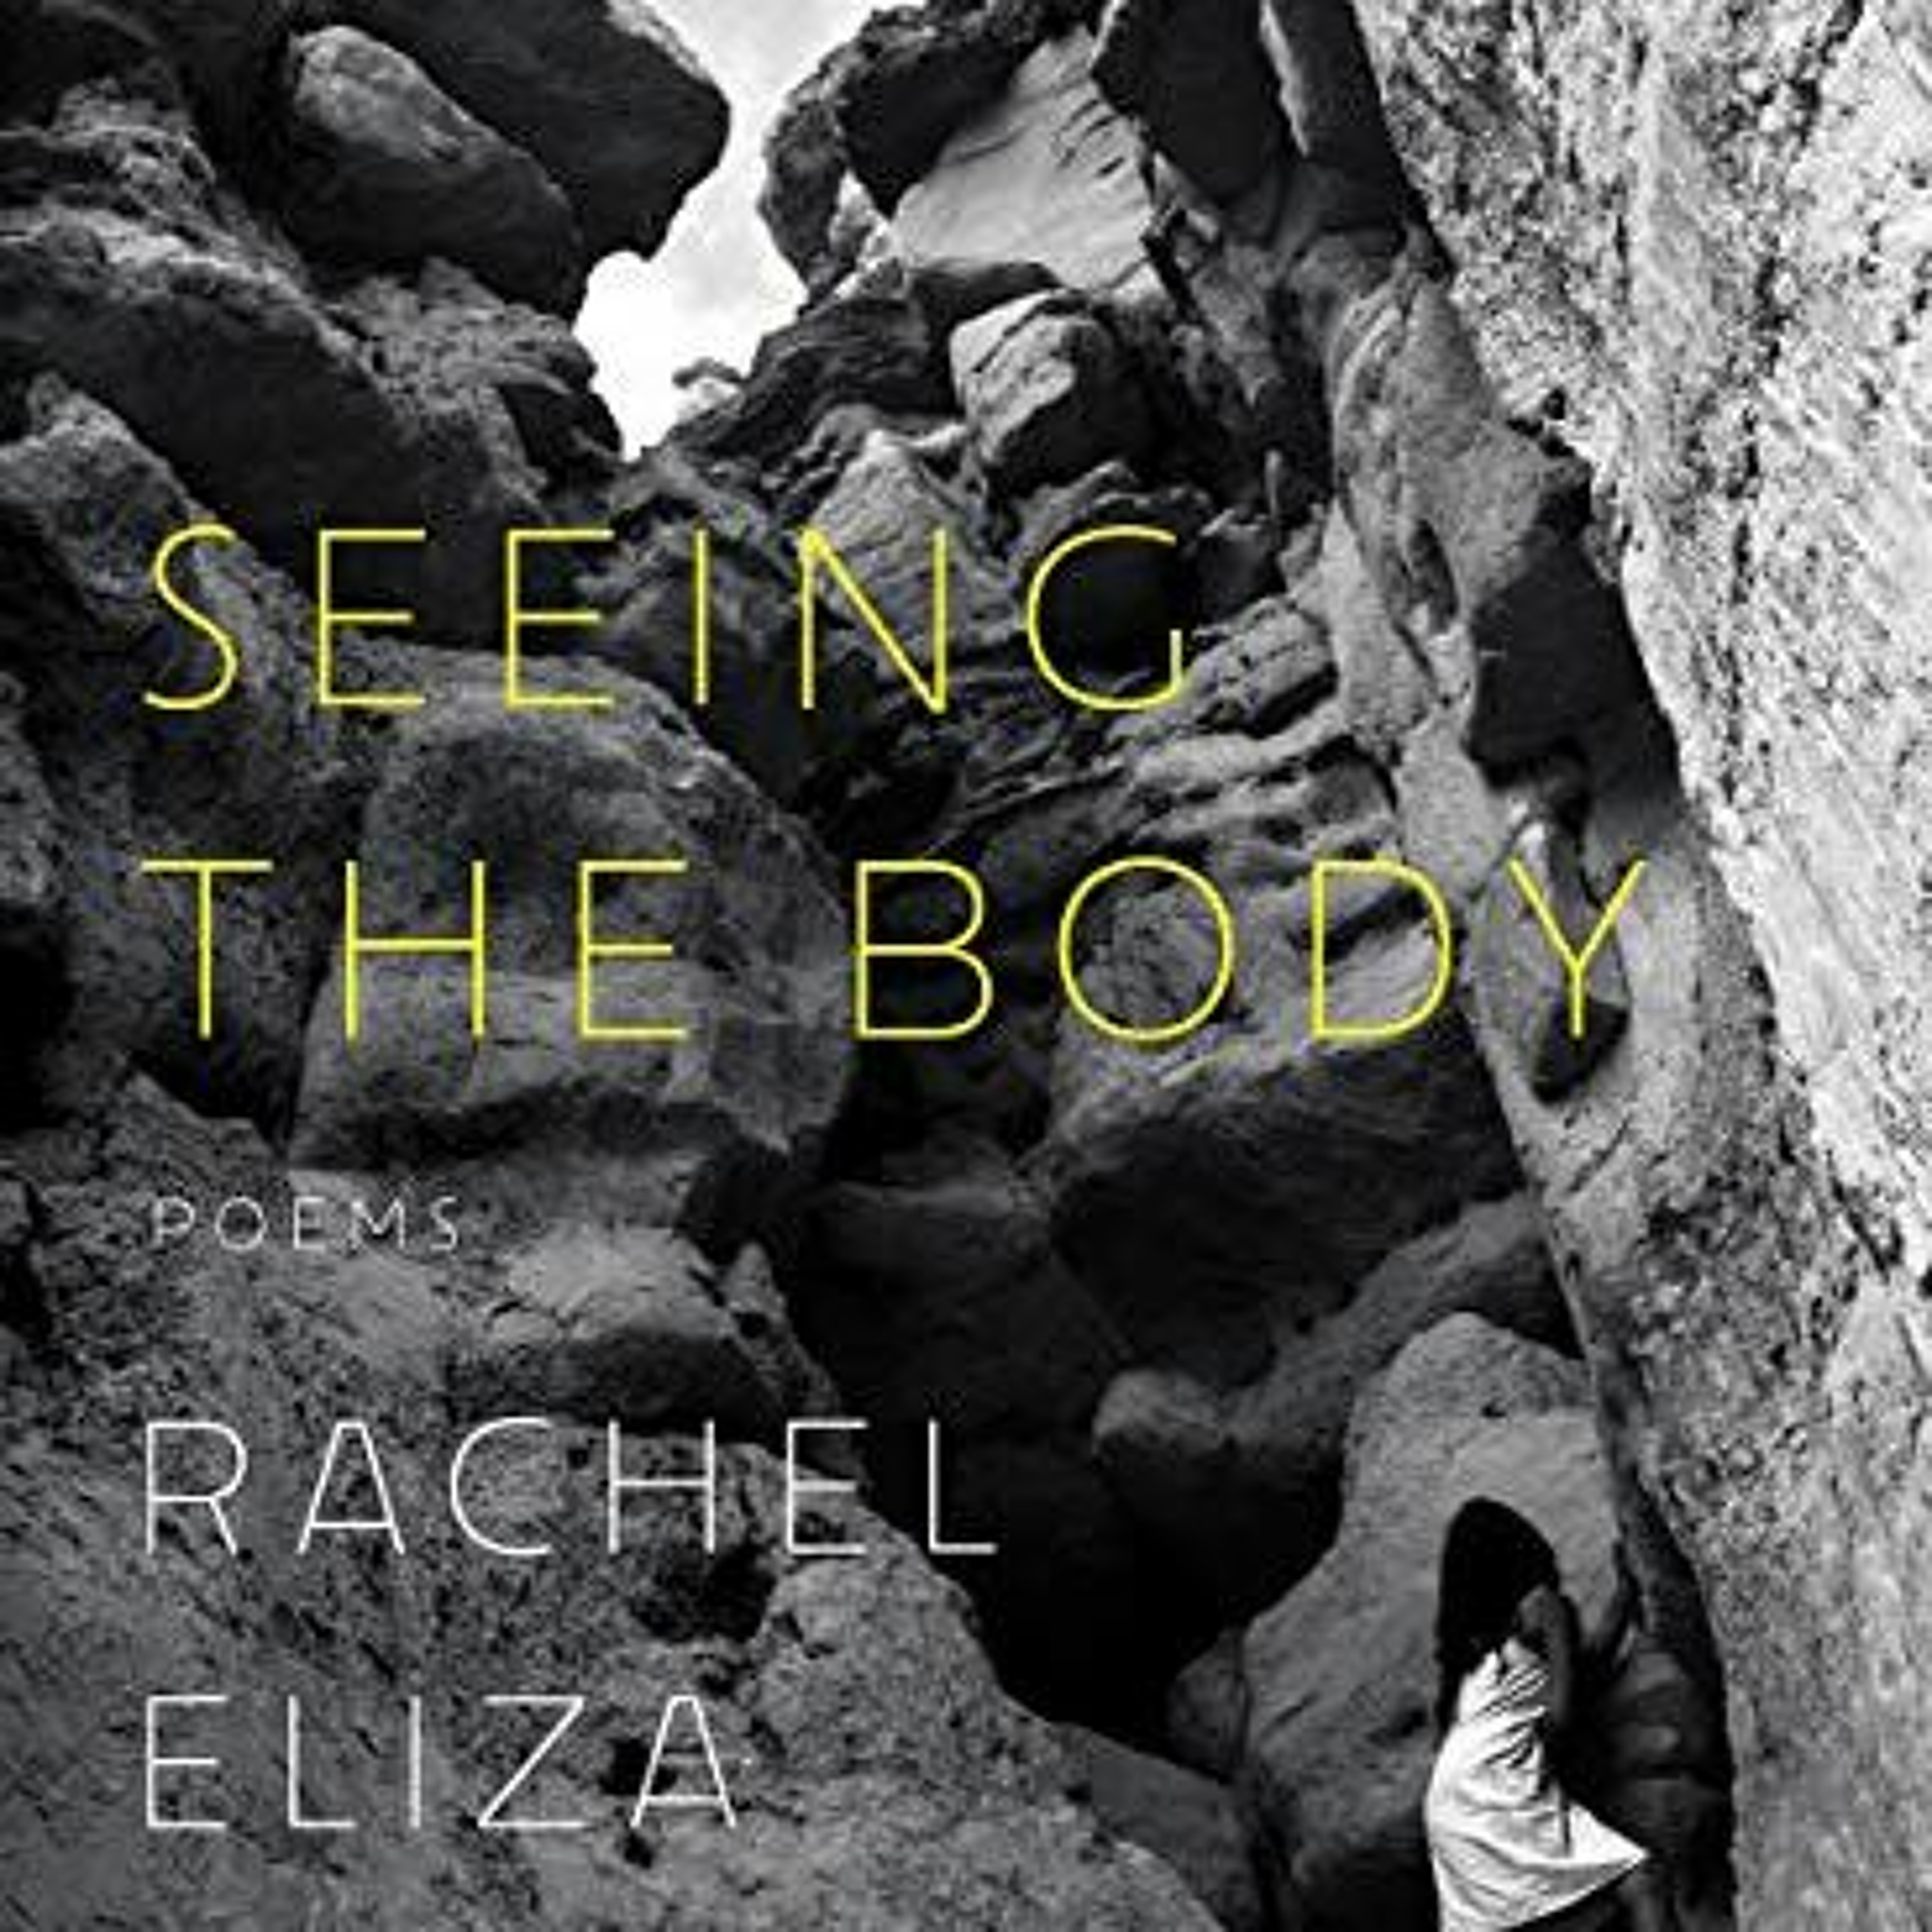 Seeing the Body by Rachel Eliza Griffiths